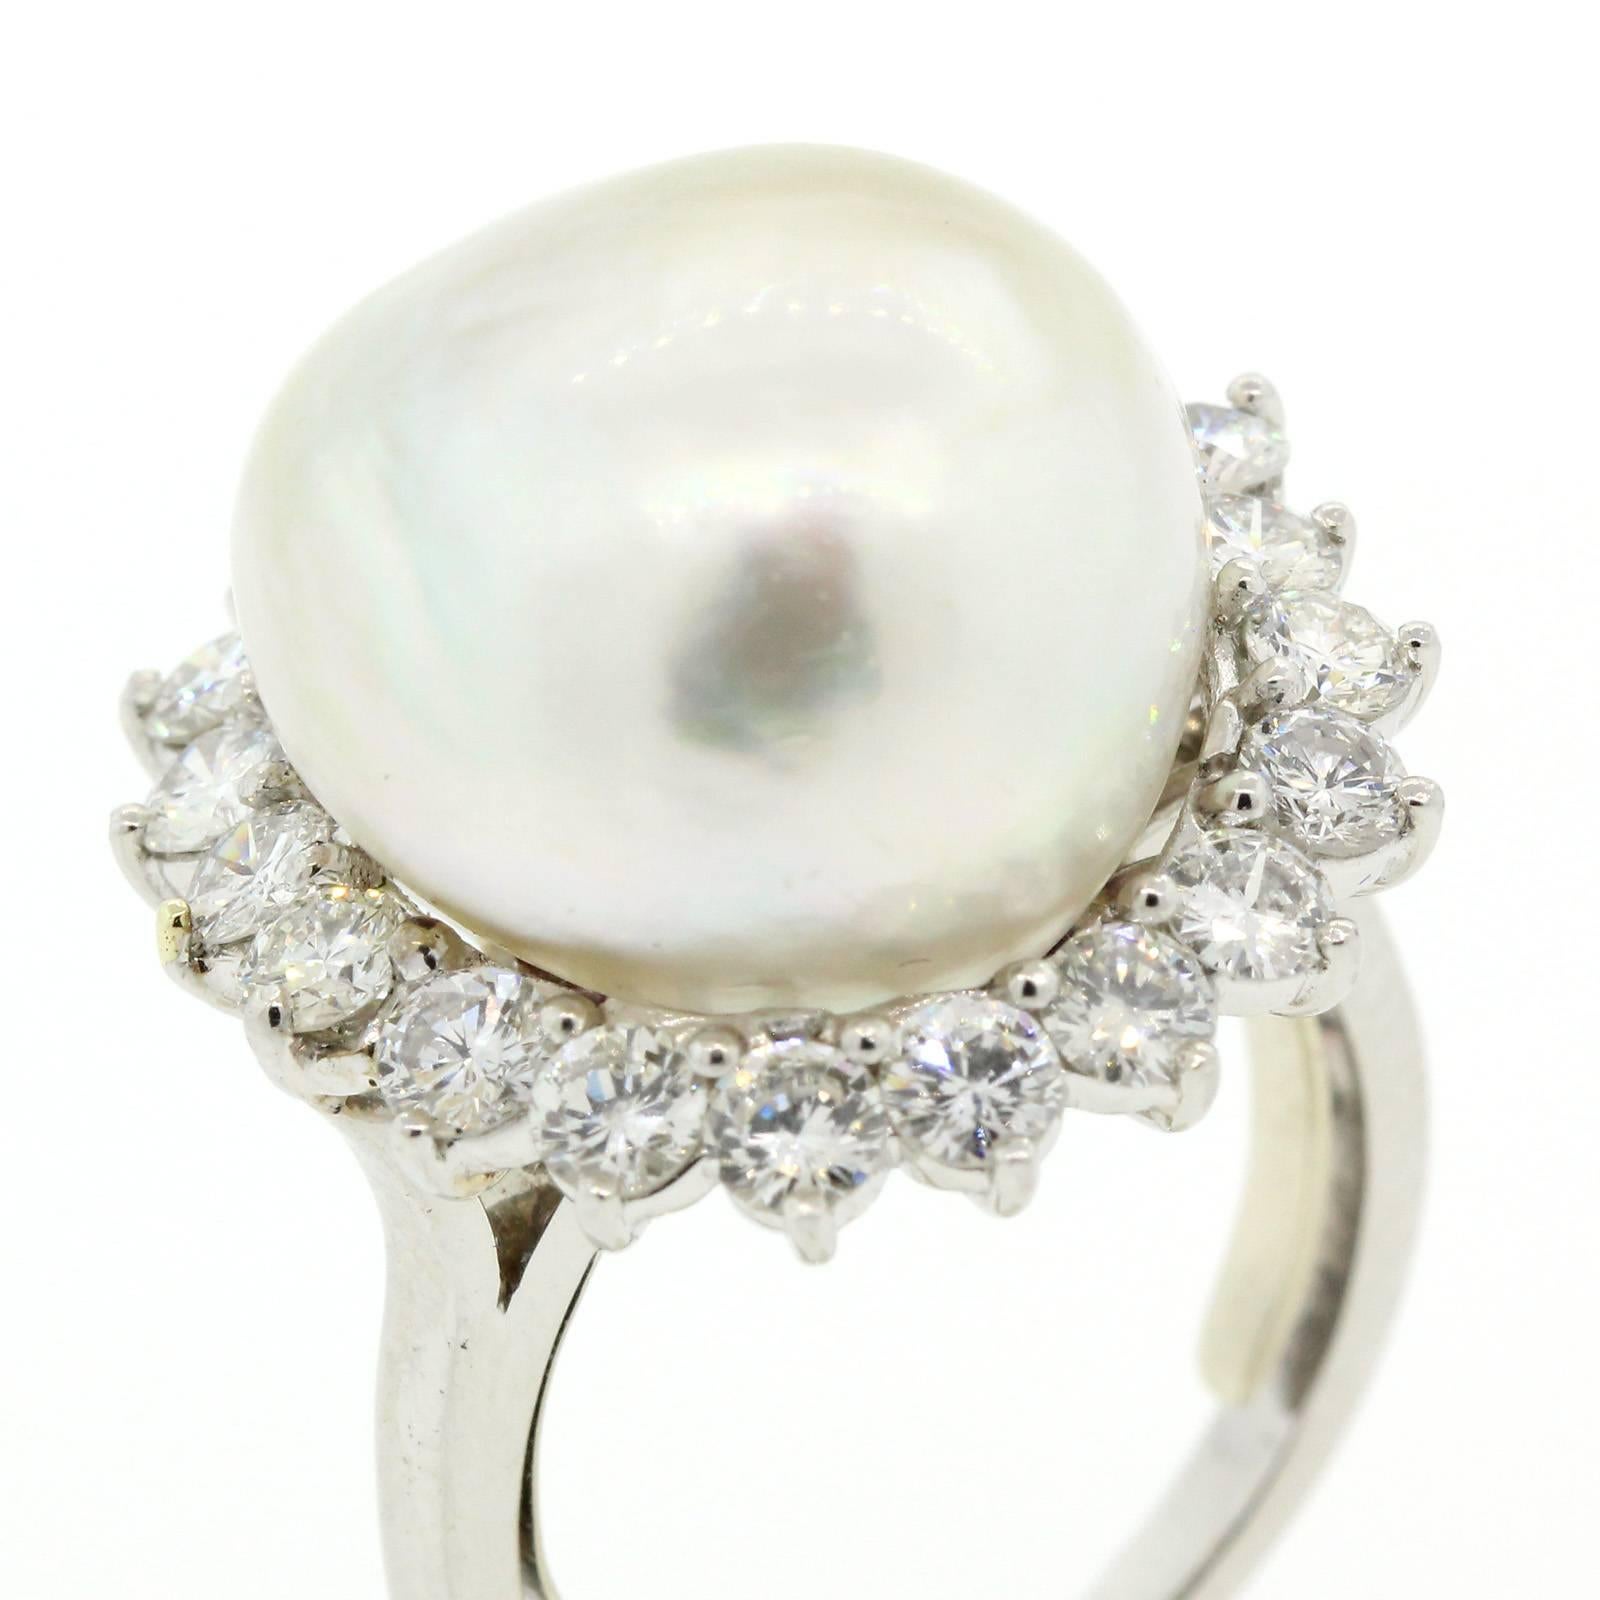 This 1970s platinum ring features a beautiful 16 mm White South Sea Pearl.  The baroque shape Pearl is surrounded by two carat eighty of Round Brilliant Cut Diamonds of G/H color - VS1 clarity.  This is the perfect cocktail ring!